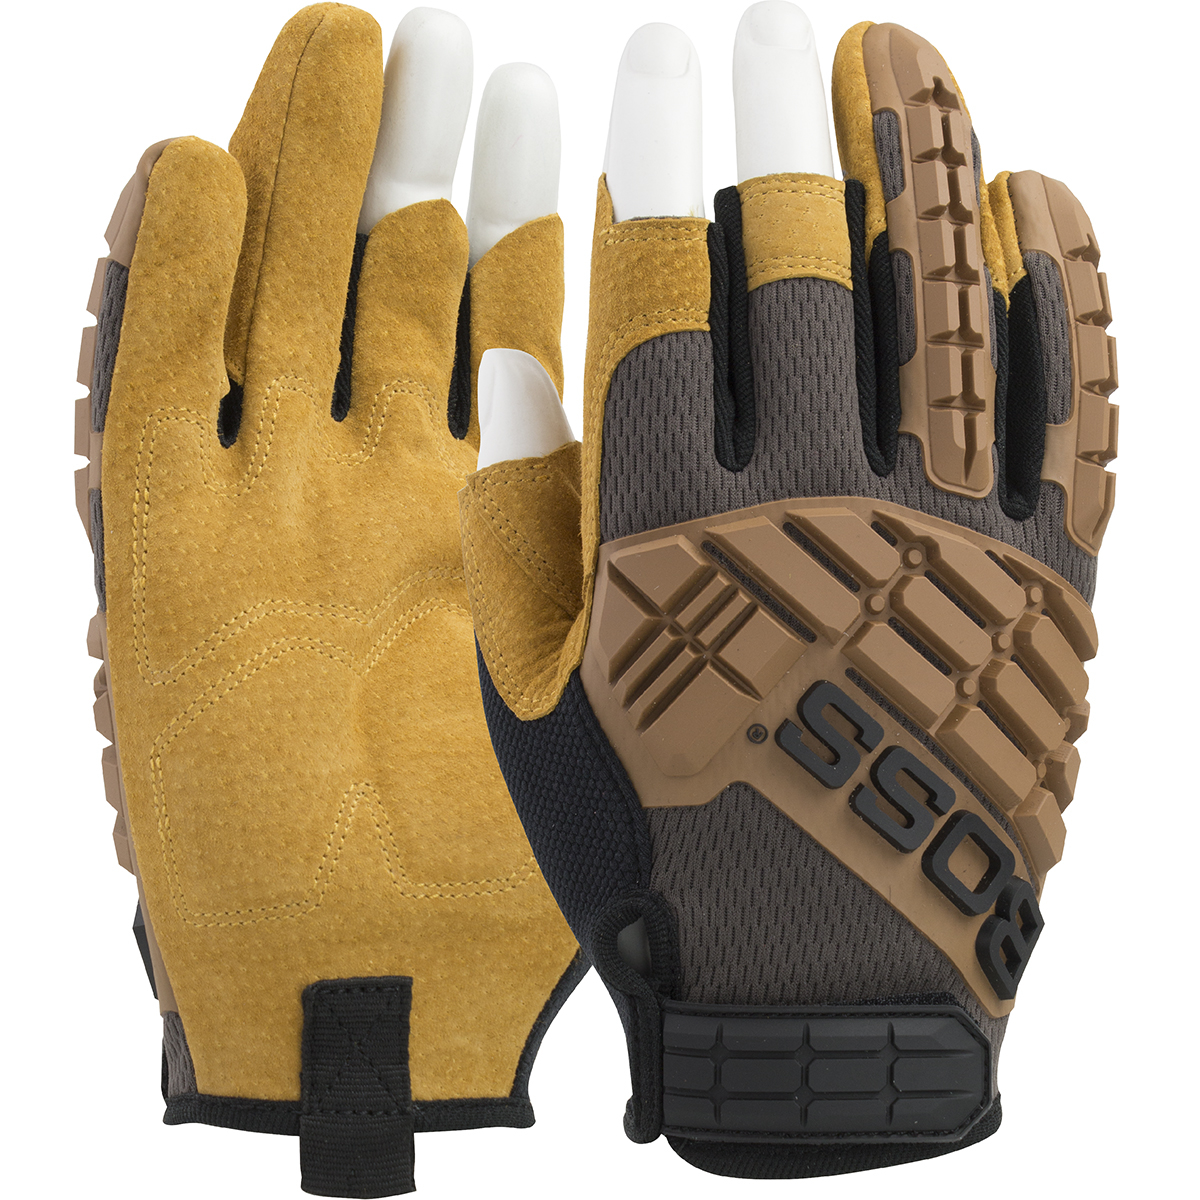 120-MF1360T  PIP® Boss® Premium Pigskin Padded Leather Palm Framer Gloves with Mesh Fabric Back and TPR Impact Protection